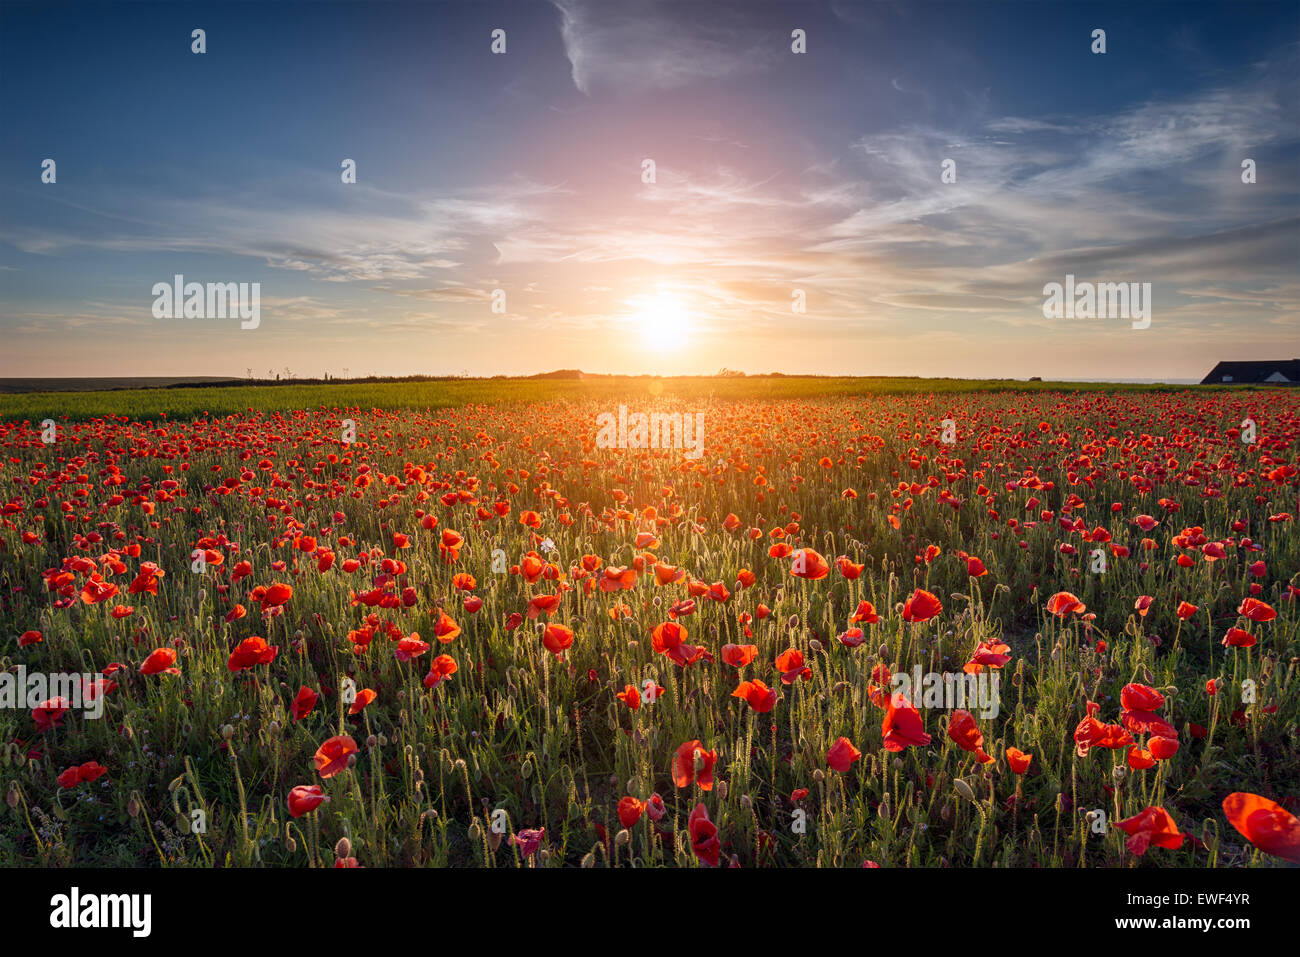 Sunset over a field of Poppies Stock Photo